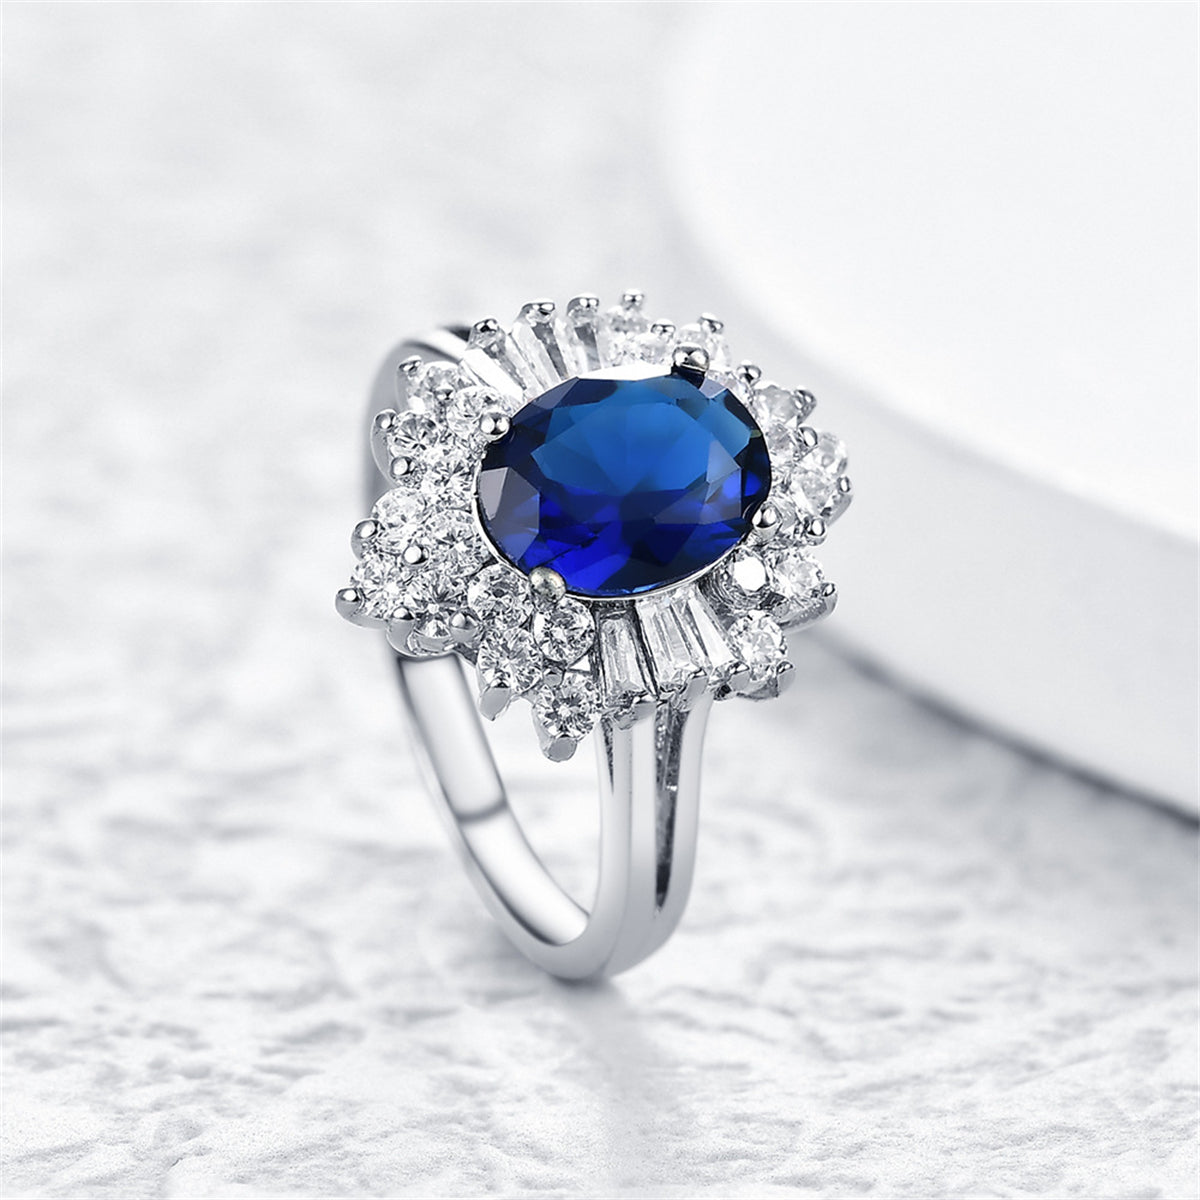 Navy Crystal & Cubic Zirconia Silver-Plated Flower Ring